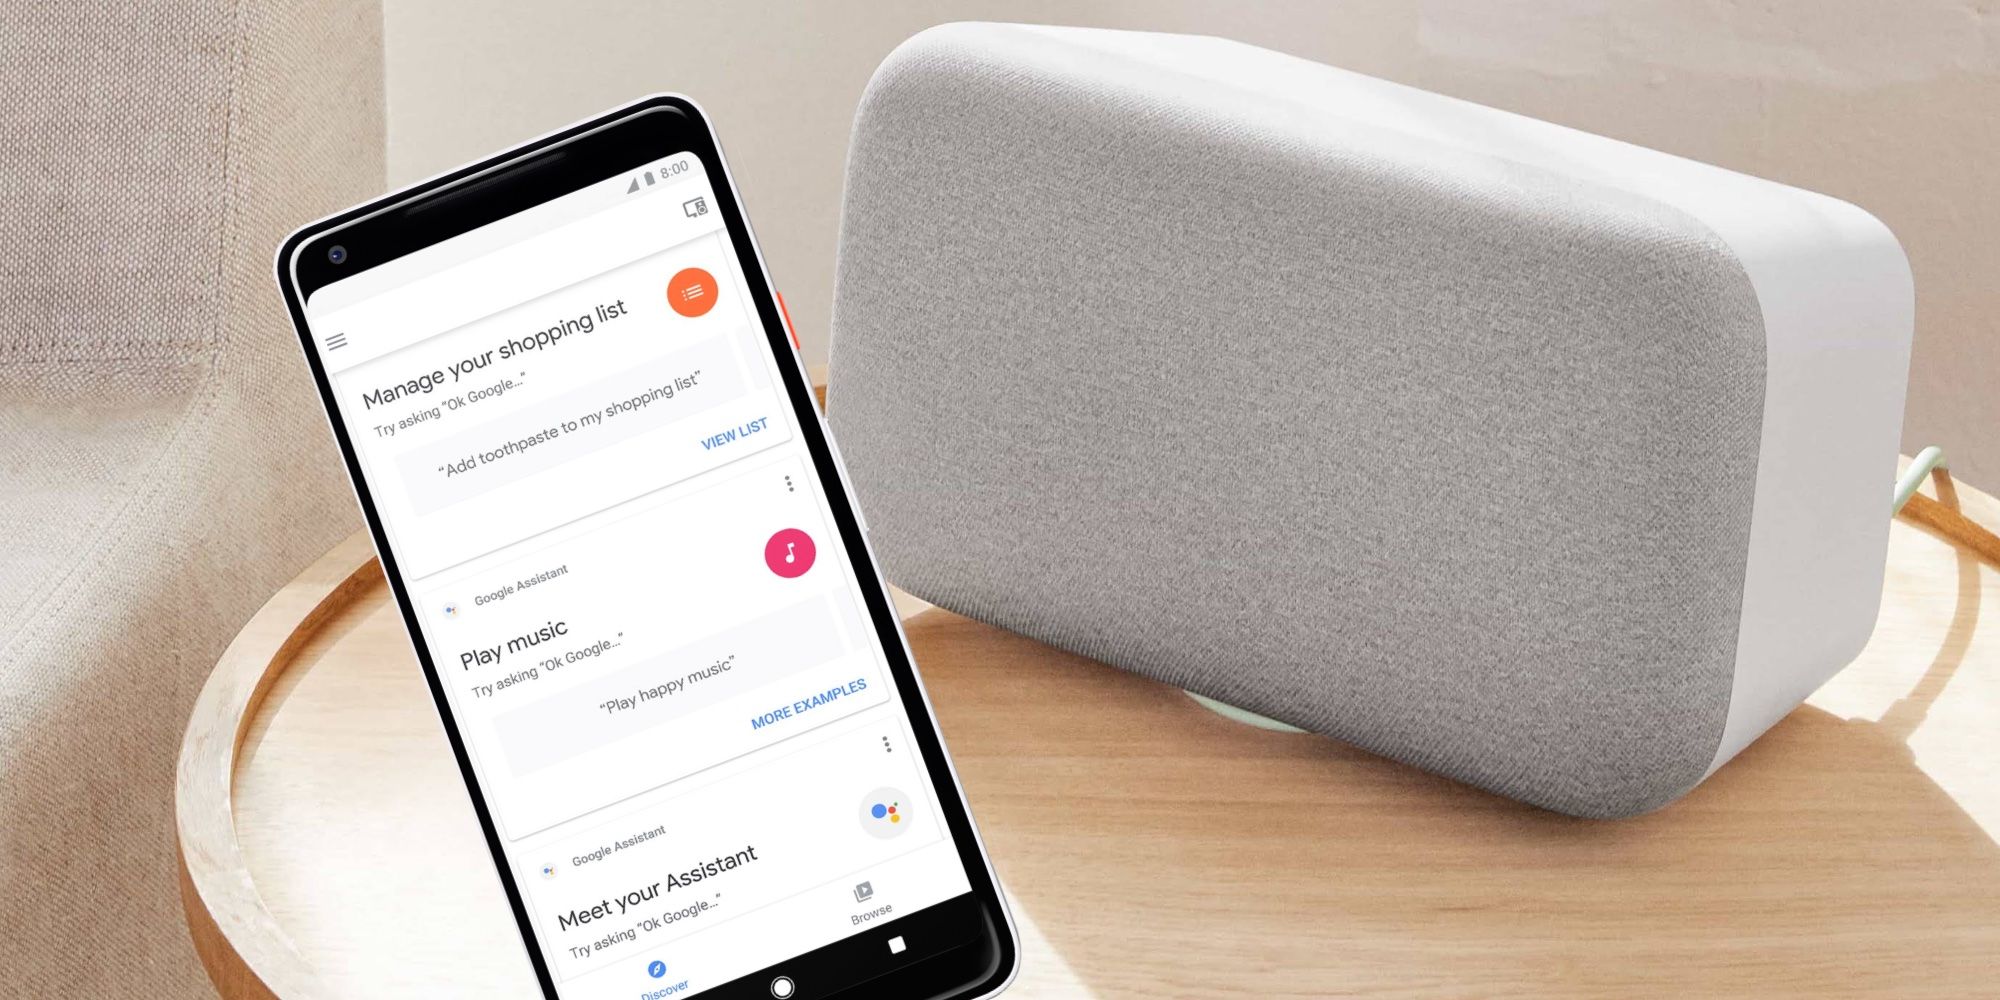 Google Assistant On Phone And Google Max Speaker